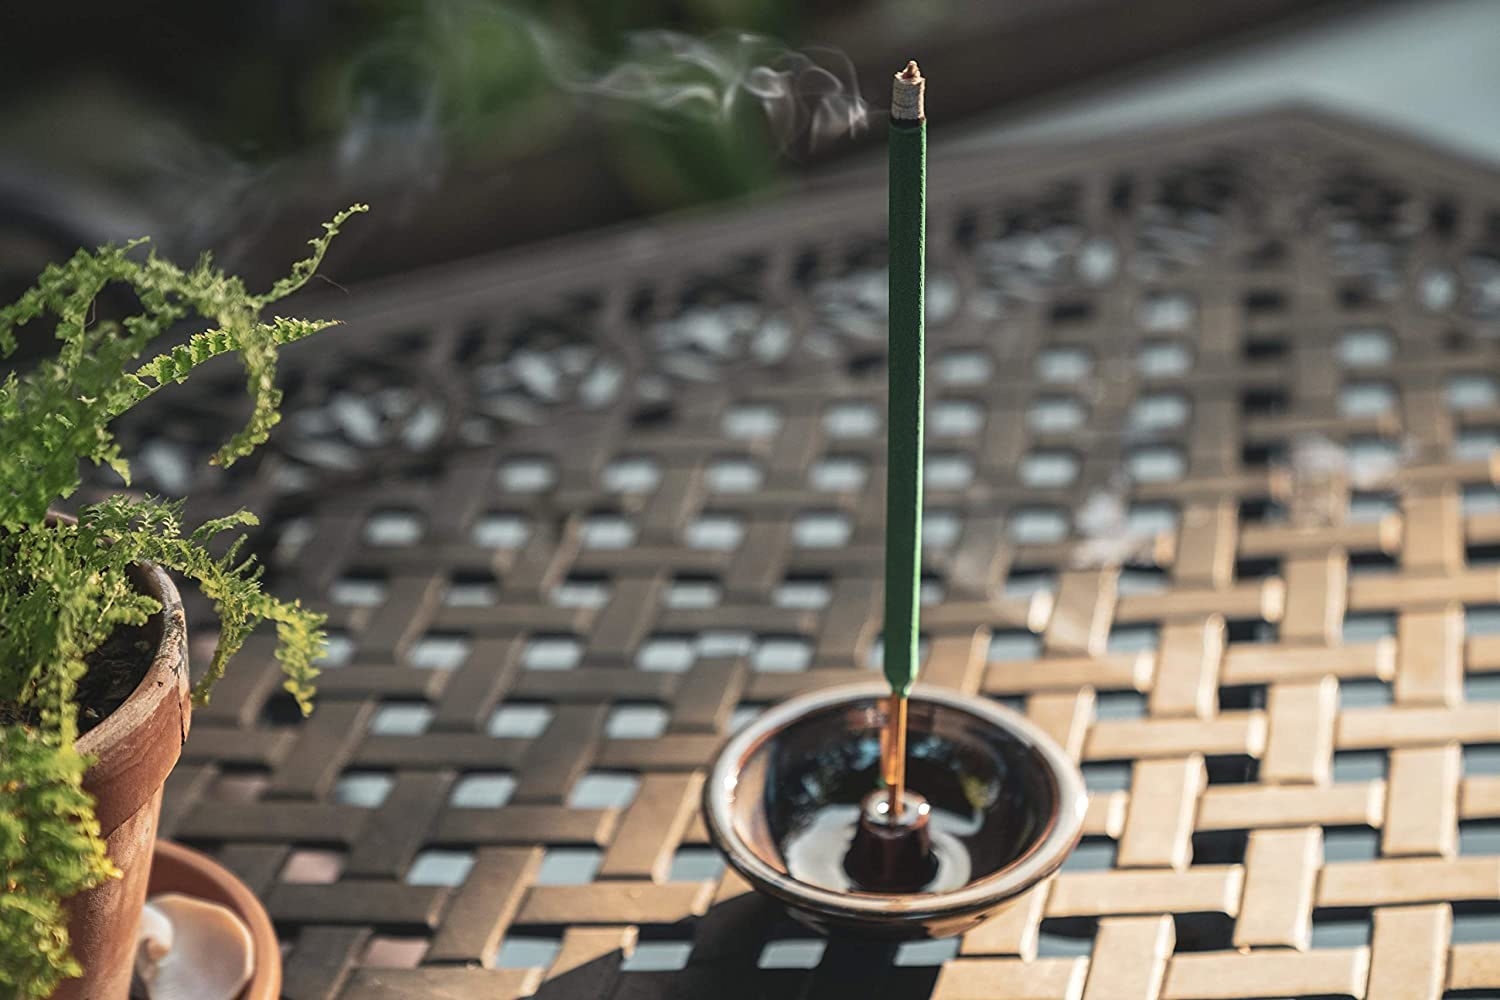 The green stick burning in an incense holder